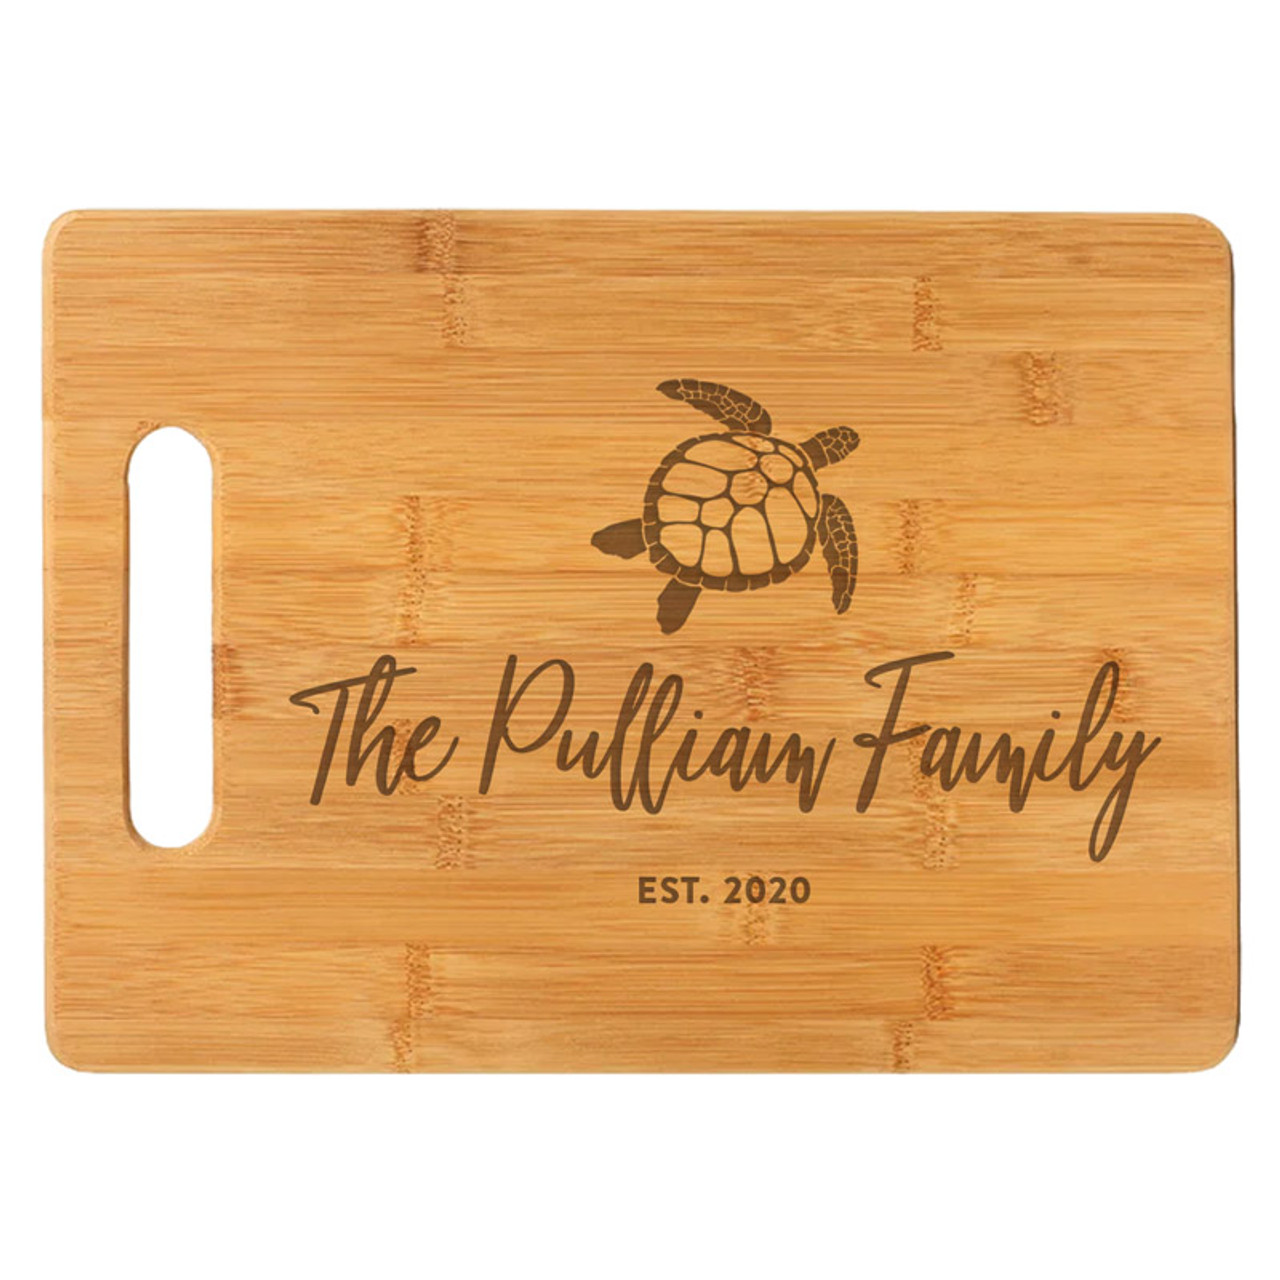 https://cdn11.bigcommerce.com/s-d22a0/images/stencil/1280x1280/products/2424/12233/personalized-cutting-board-sea-turtle-CTB454__00246.1656433332.jpg?c=2